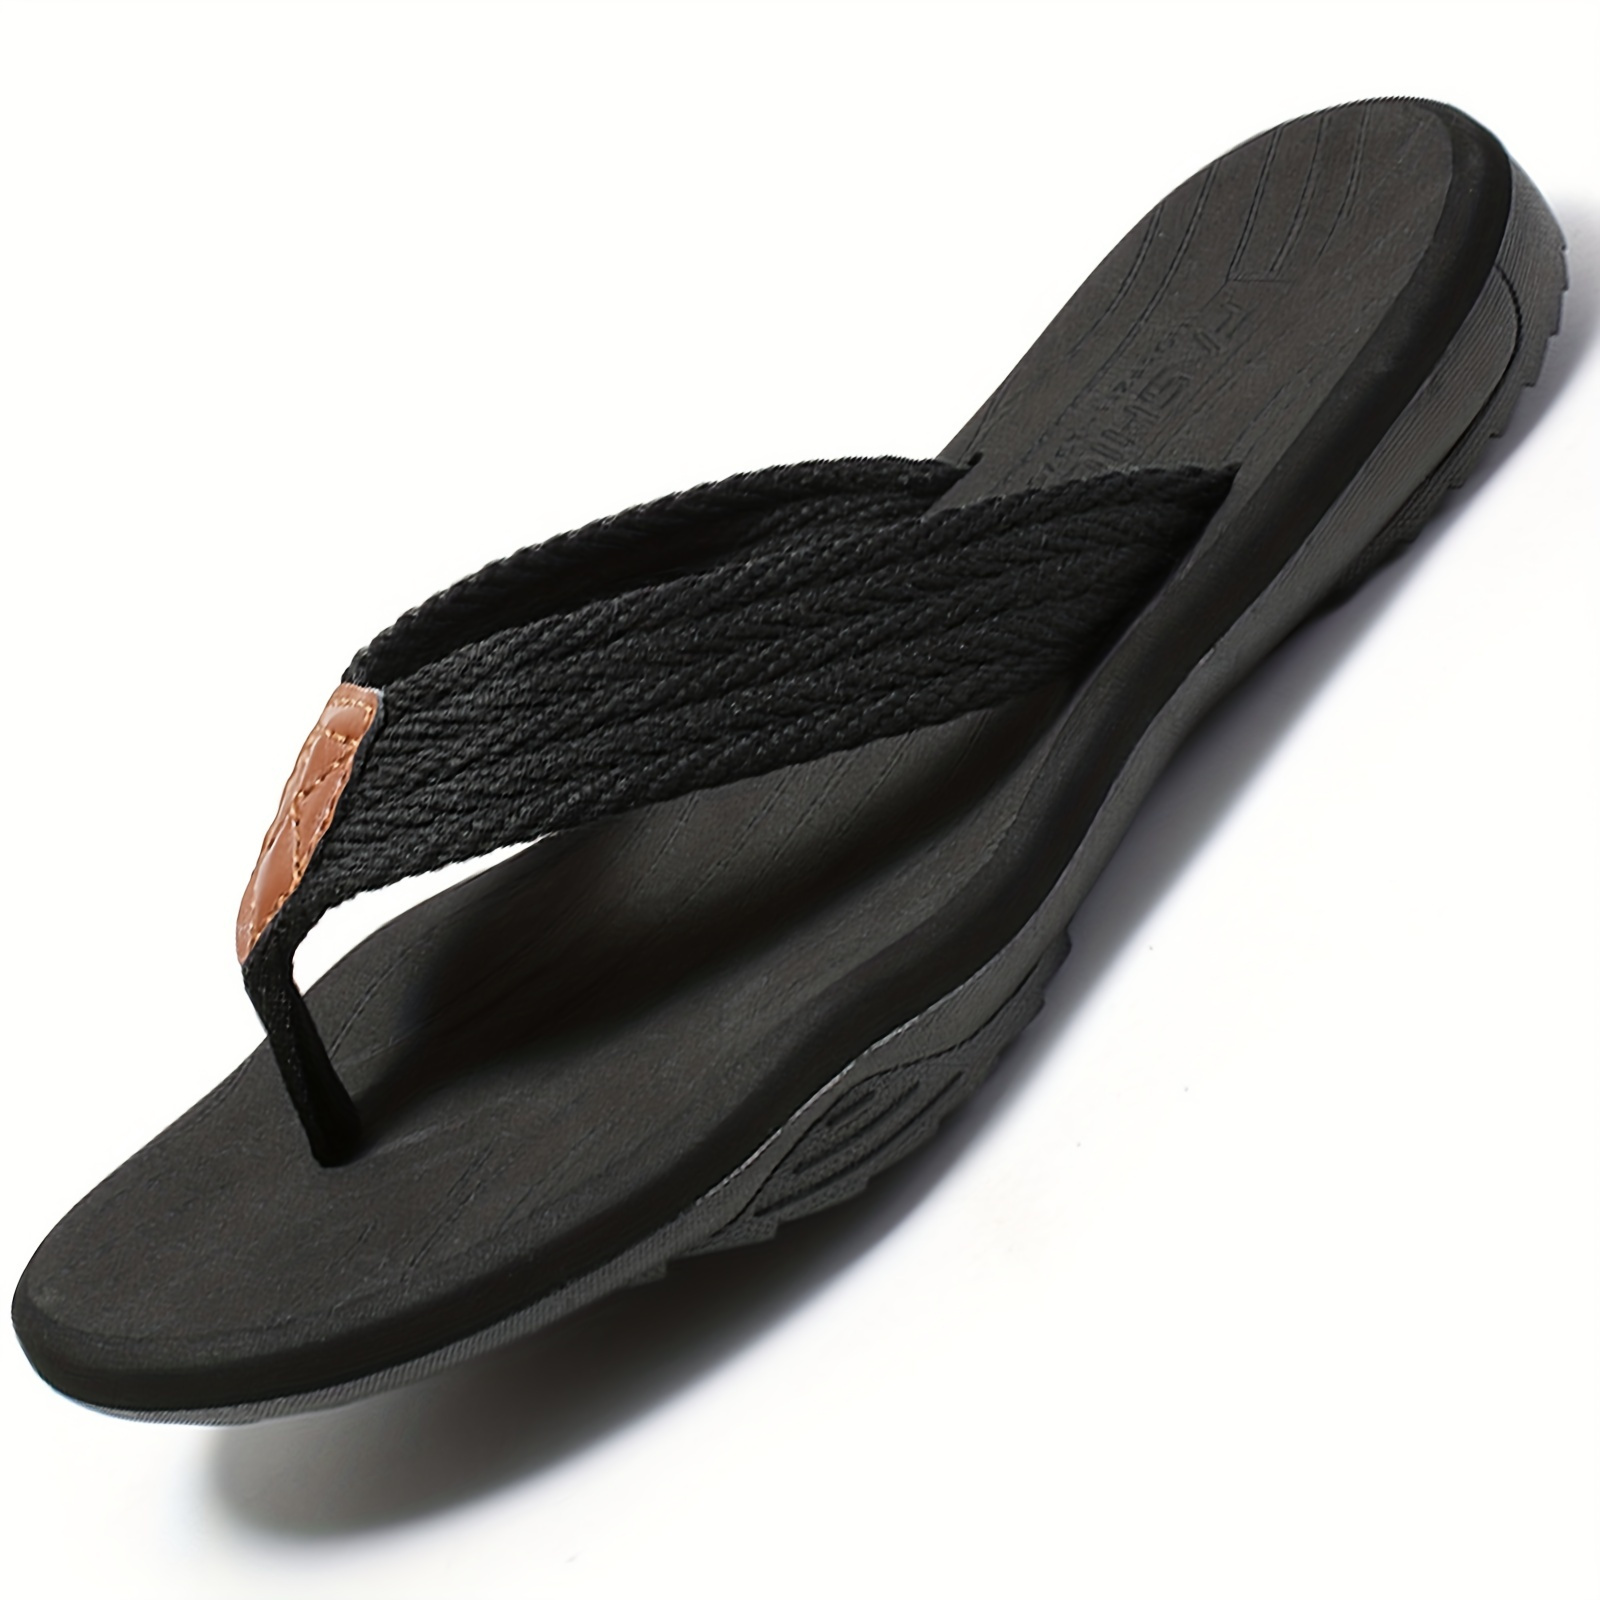 

Men's Trendy Hemp Strap Flip Flops, Casual Outdoor Walking Slippers For Beach And Outdoors